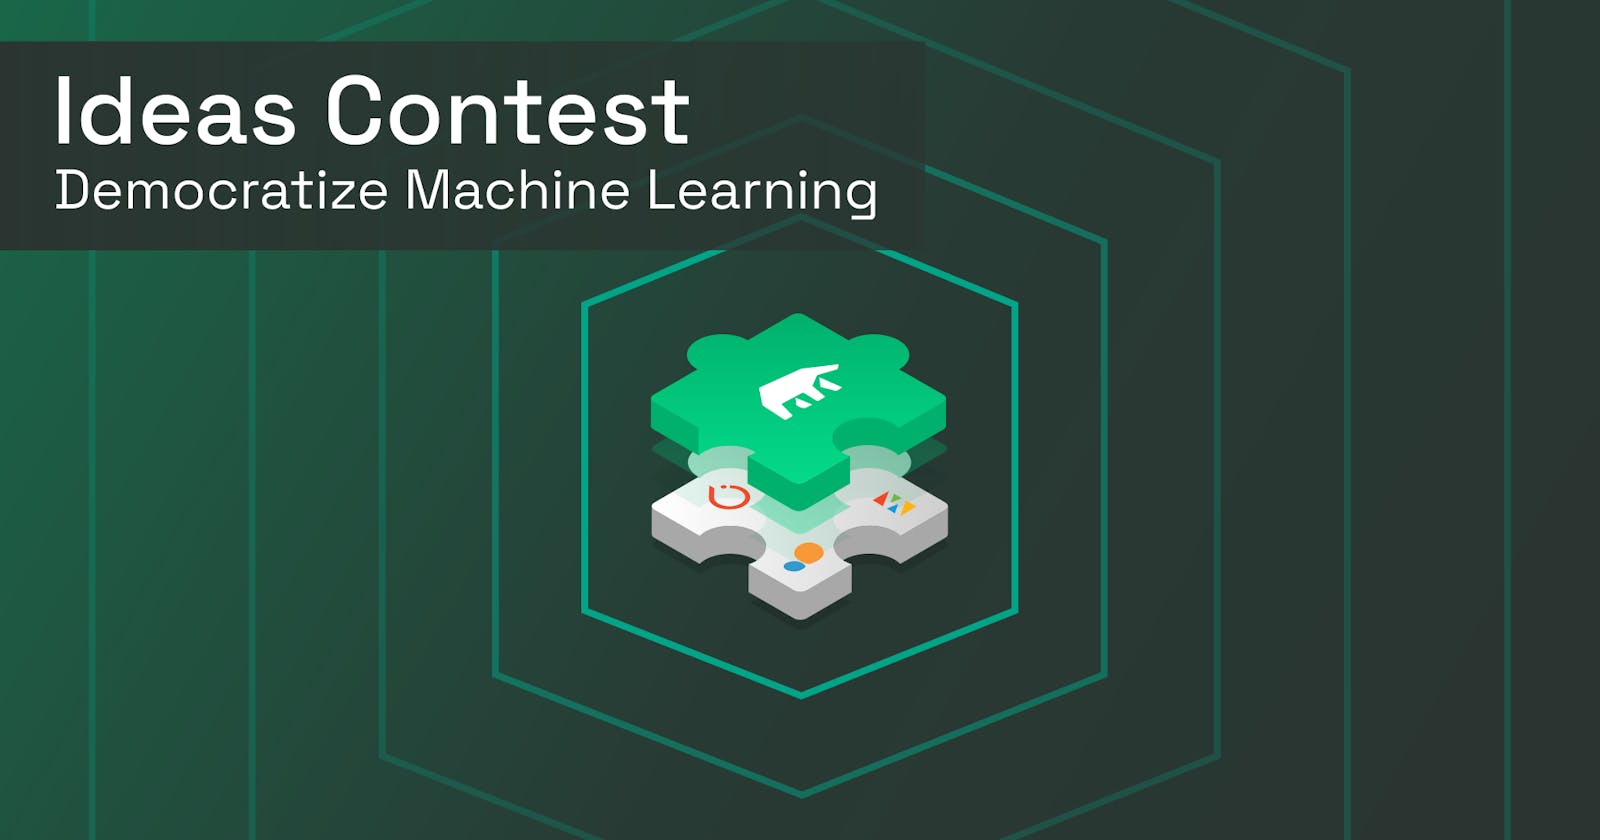 The contest of ideas to democratize machine learning